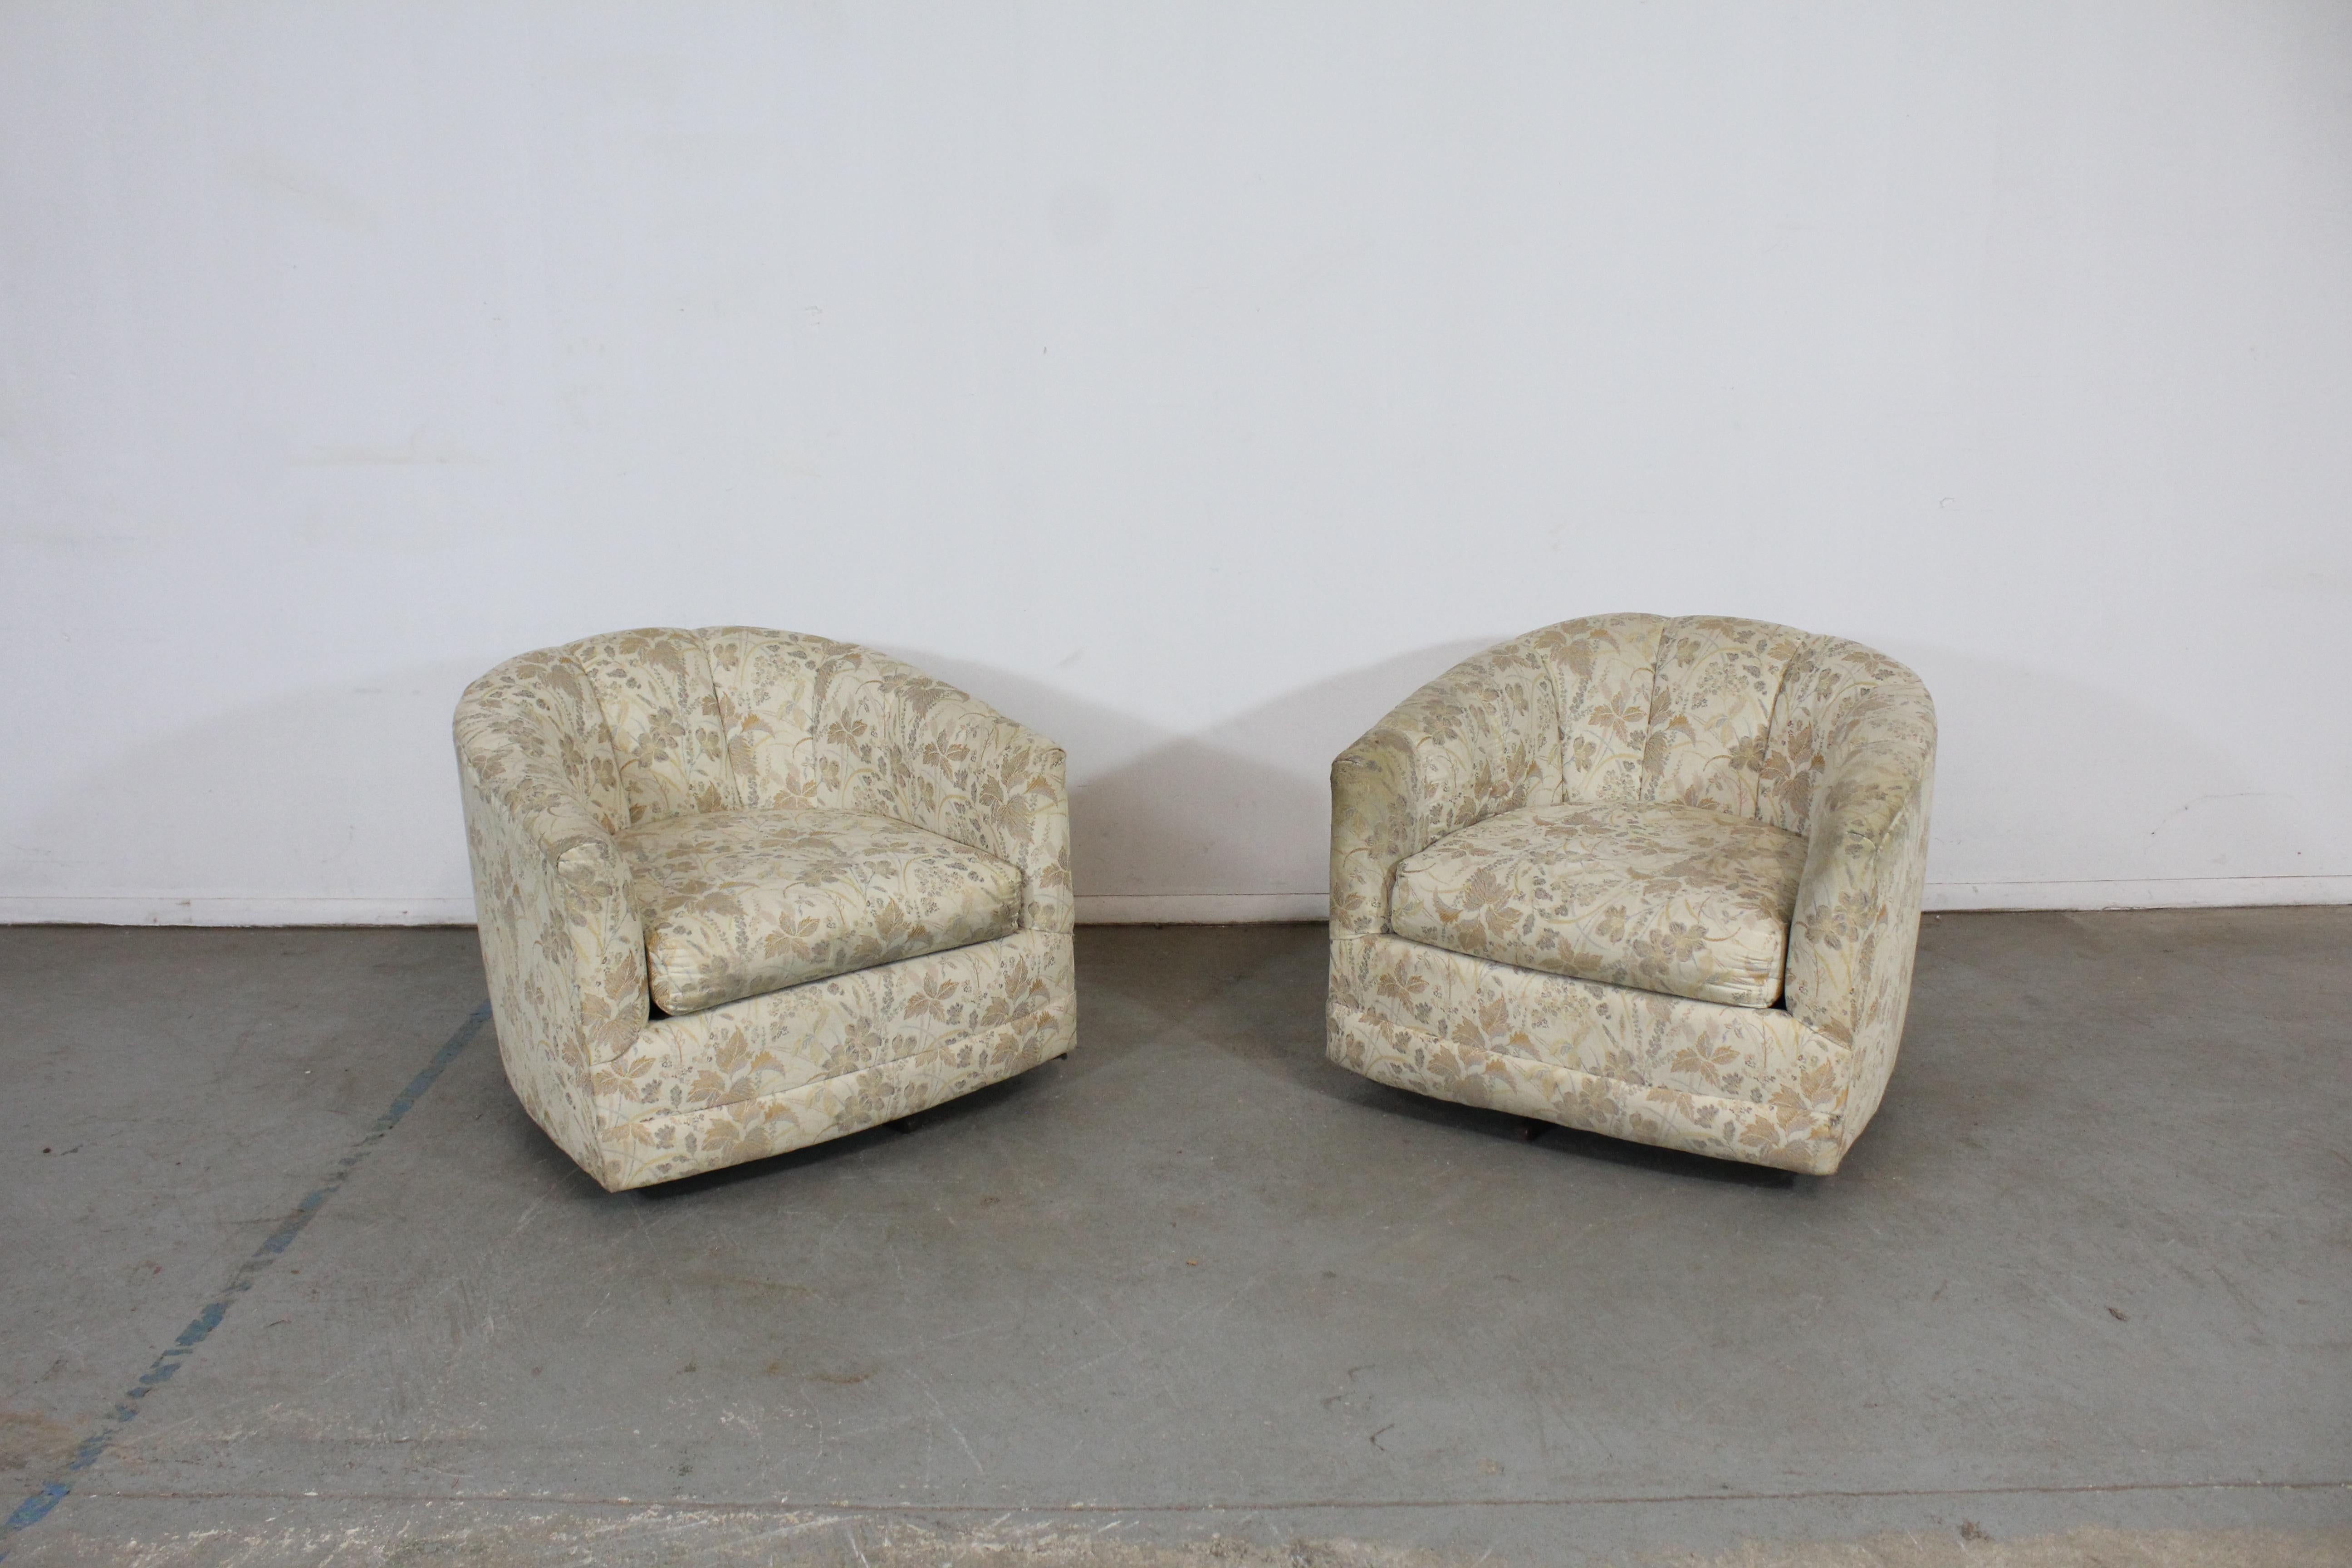 Pair of Mid-Century Modern Barrel back swivel club chairs

Offered is a pair of vintage Mid-Century Modern style swivel chairs. These chairs have round backs and metal bases. We're unsure of their exact age, but we estimate mid-late 20th century.